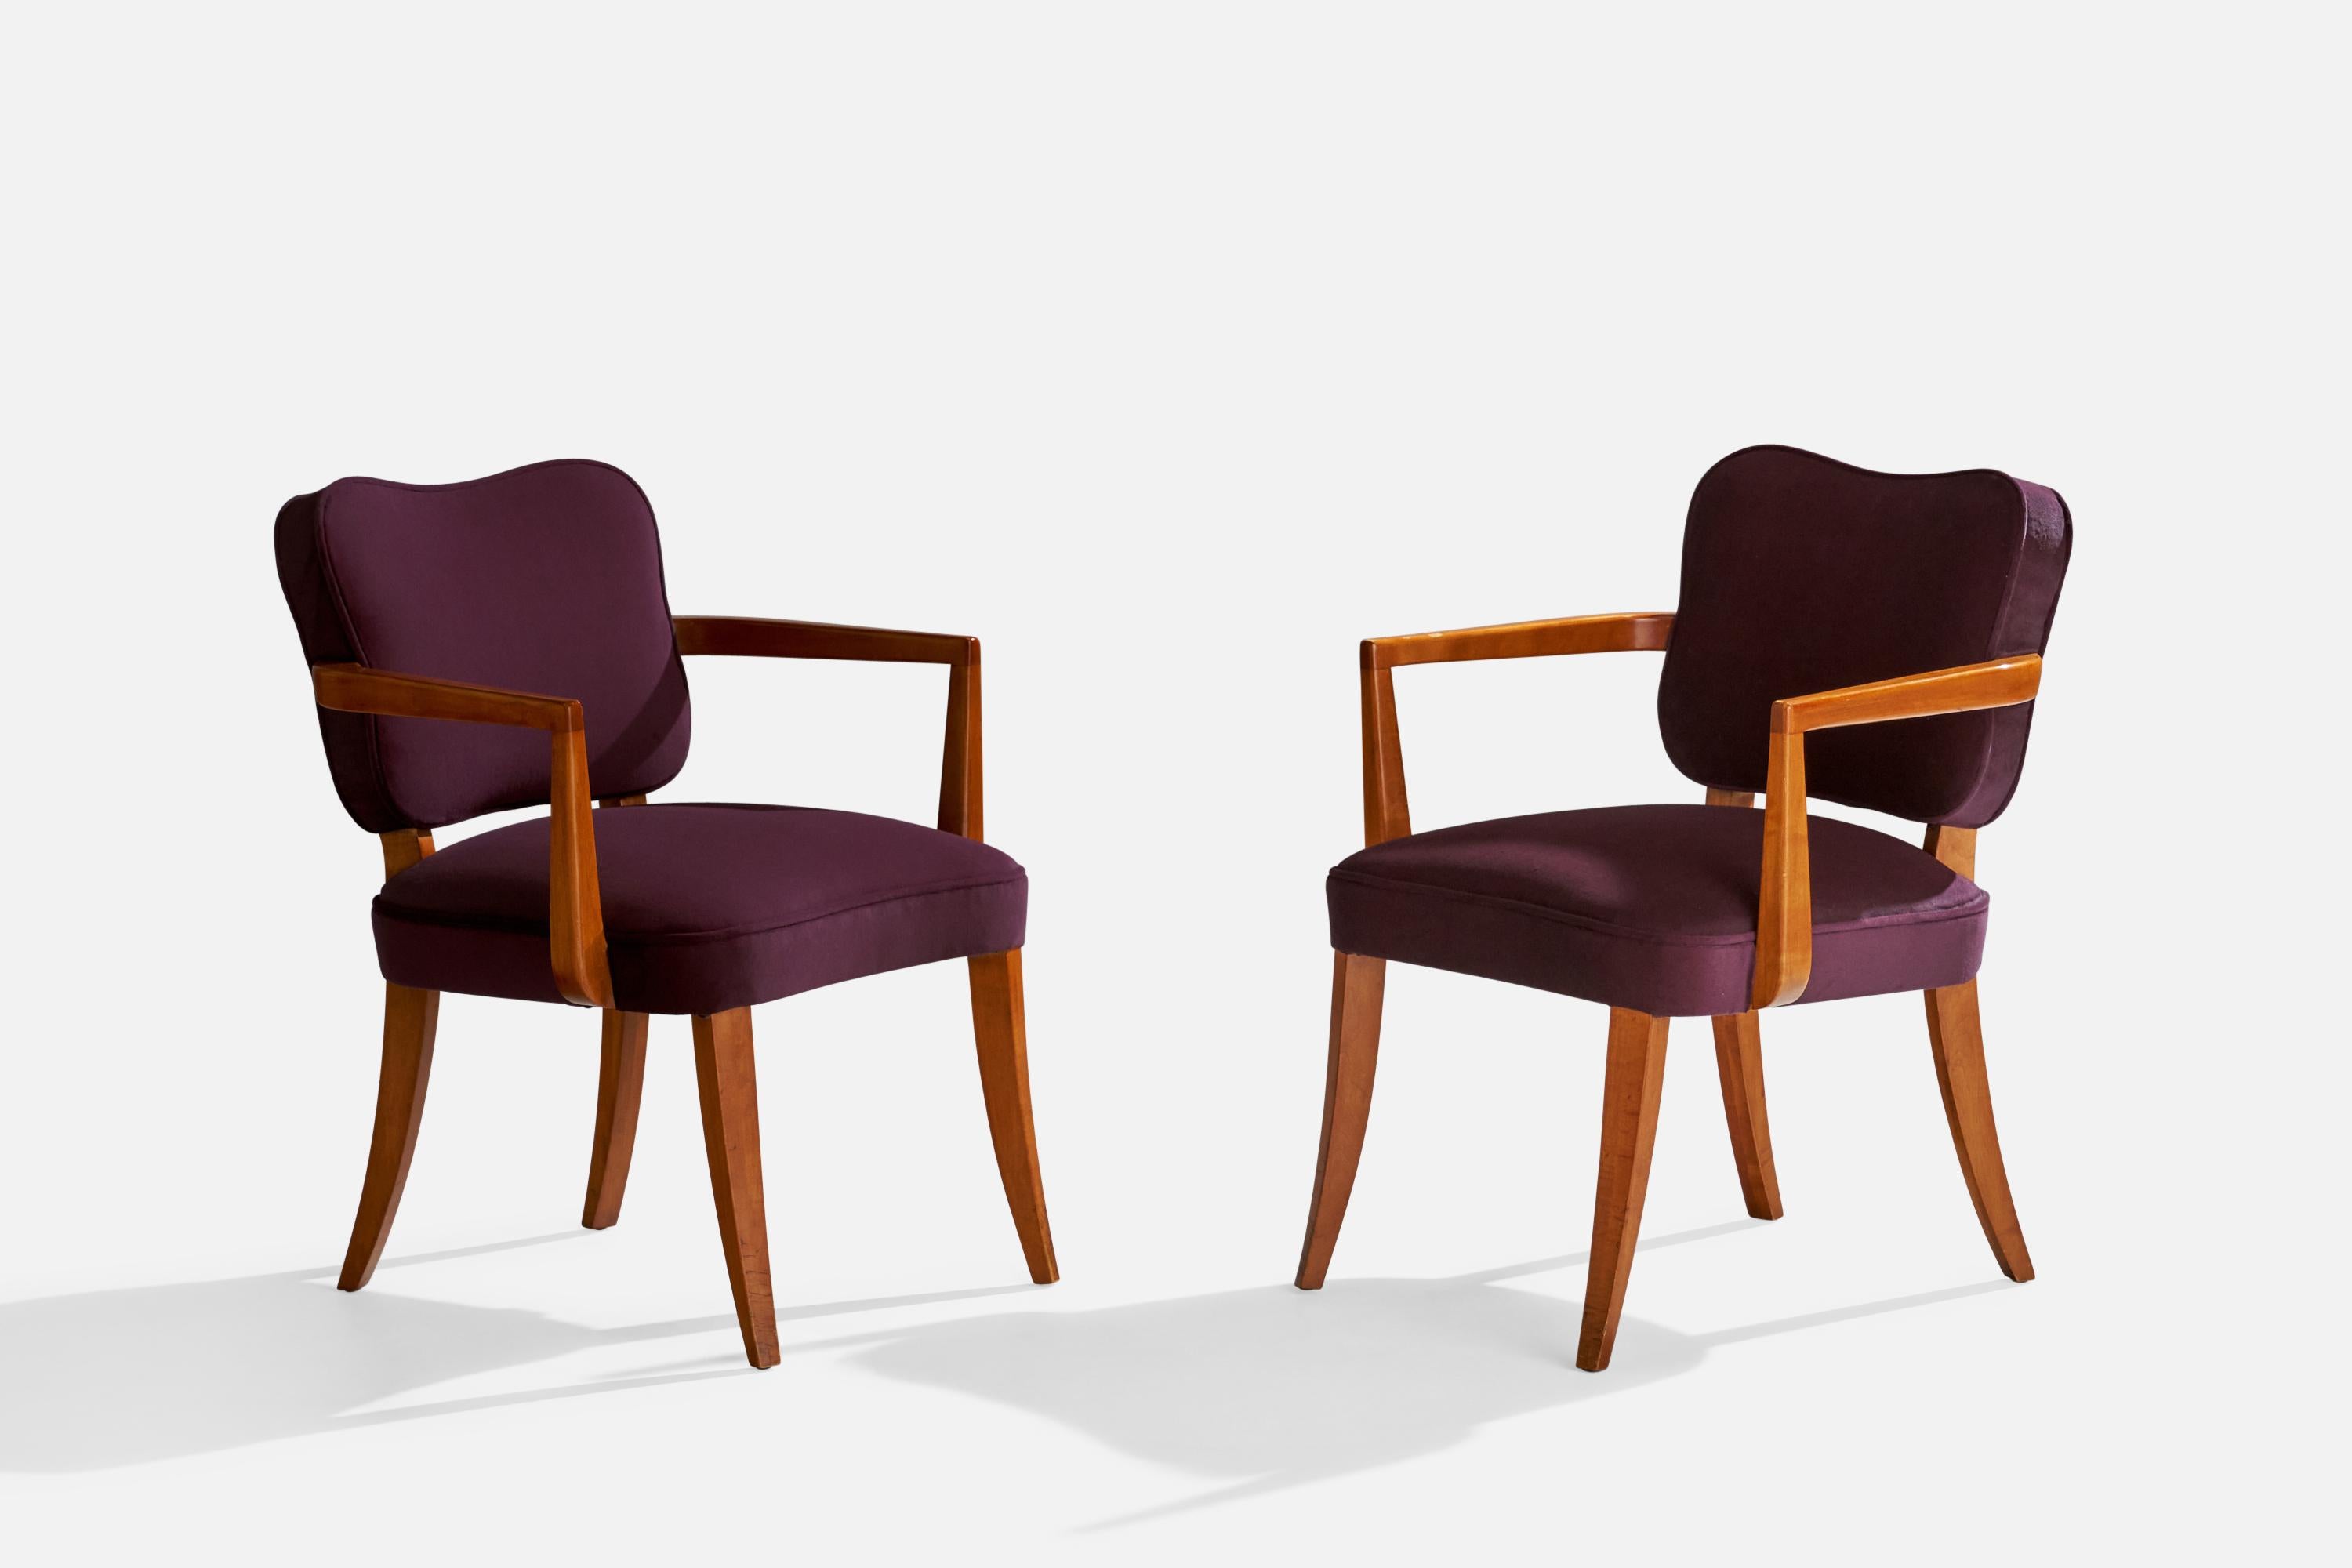 A pair of cherrywood and purple velvet armchairs designed by Gilbert Rohde and produced by Herman Miller, Zeeland, Michigan, 1940s. 

Seat height 17.5”.